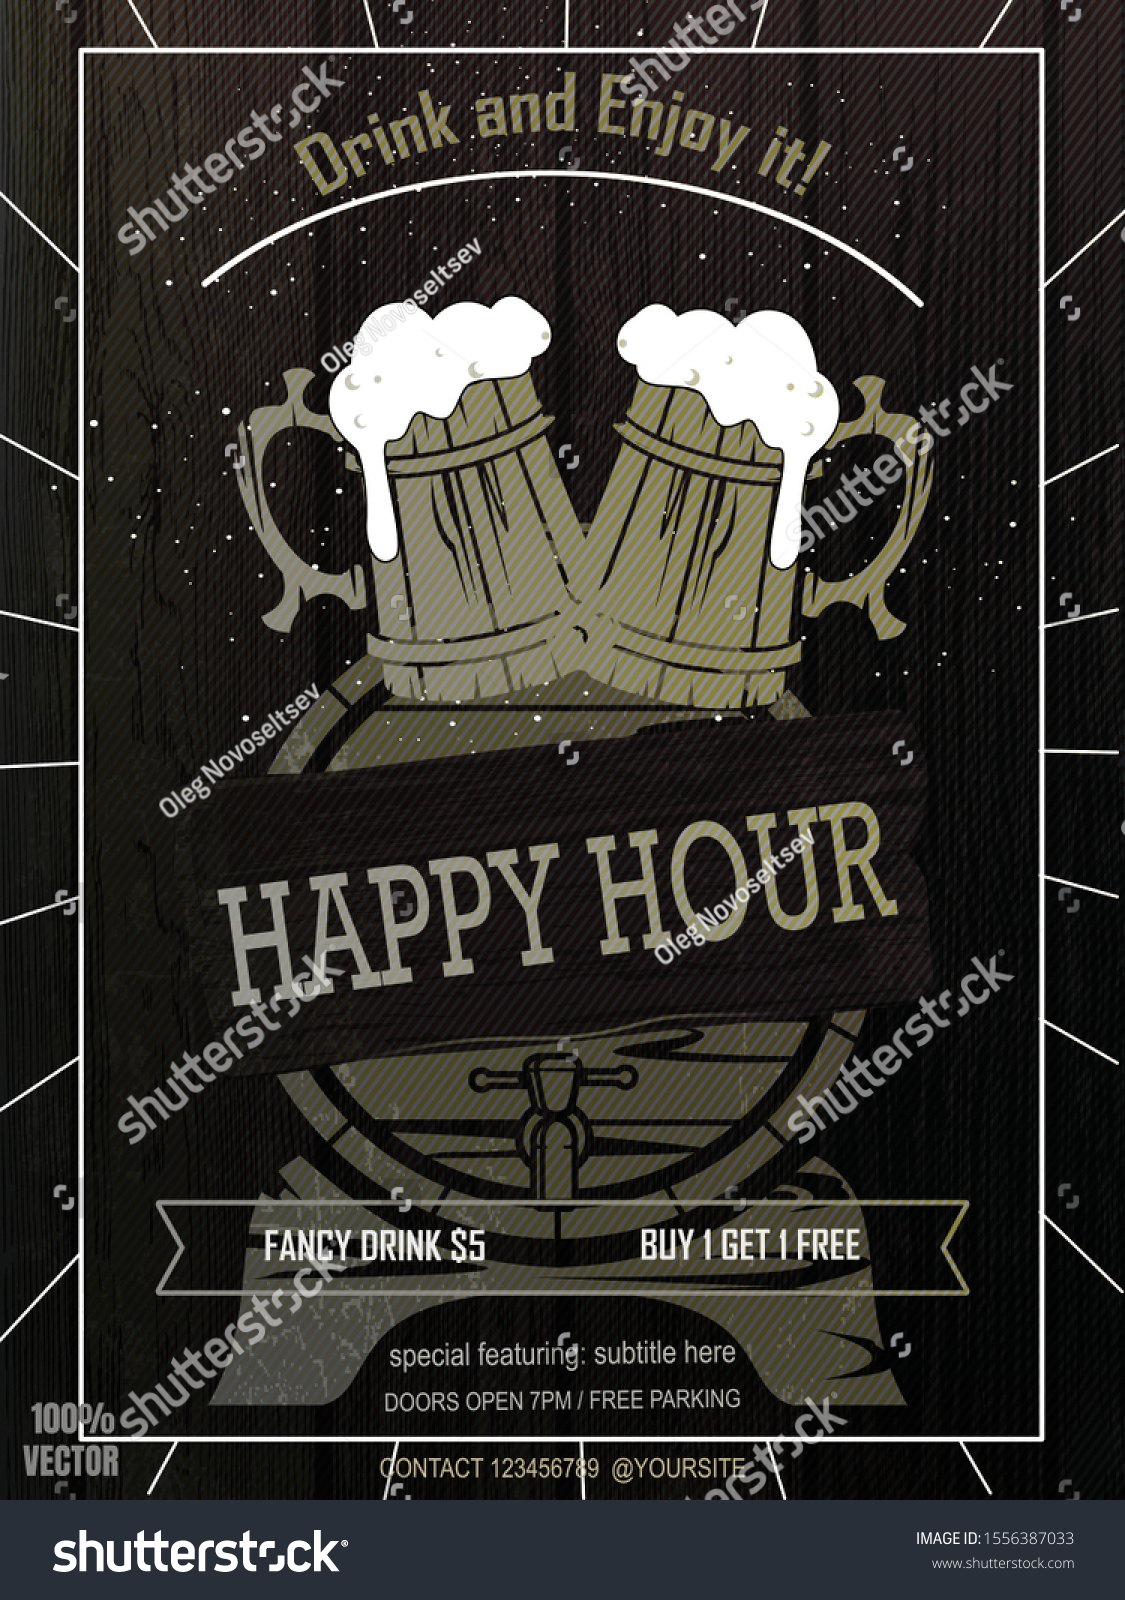 Free Happy Hour Flyer Template from image.shutterstock.com